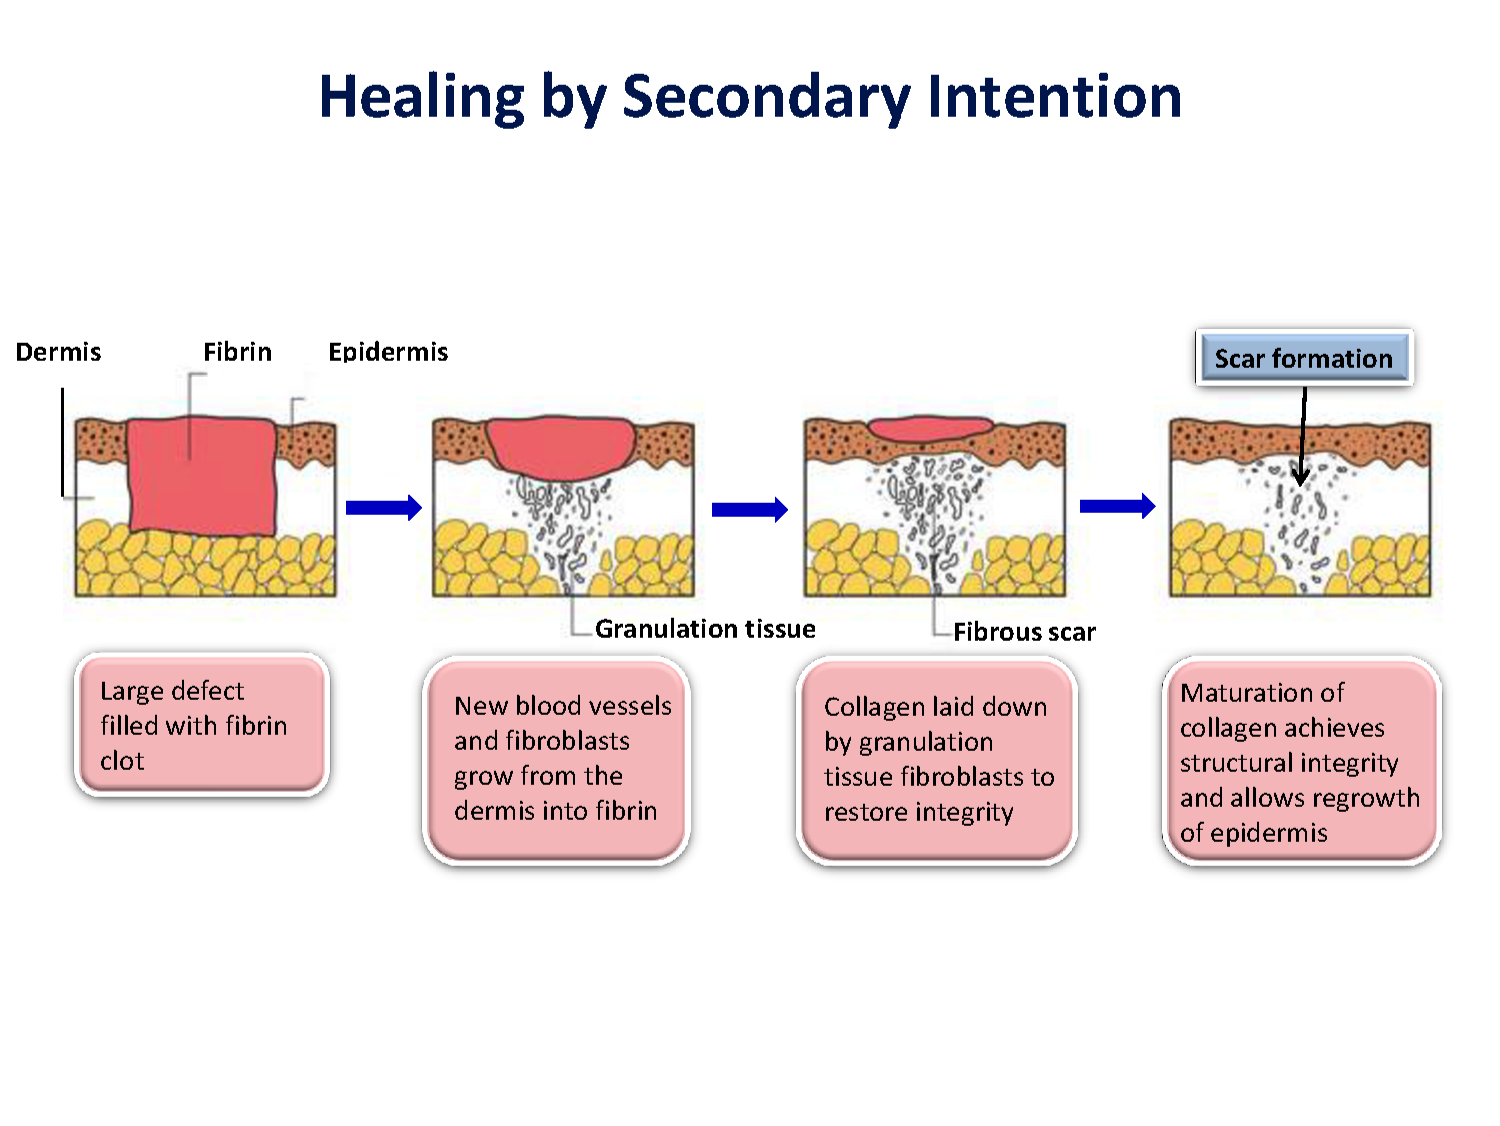 secondary-intention-healing-pictures-photos